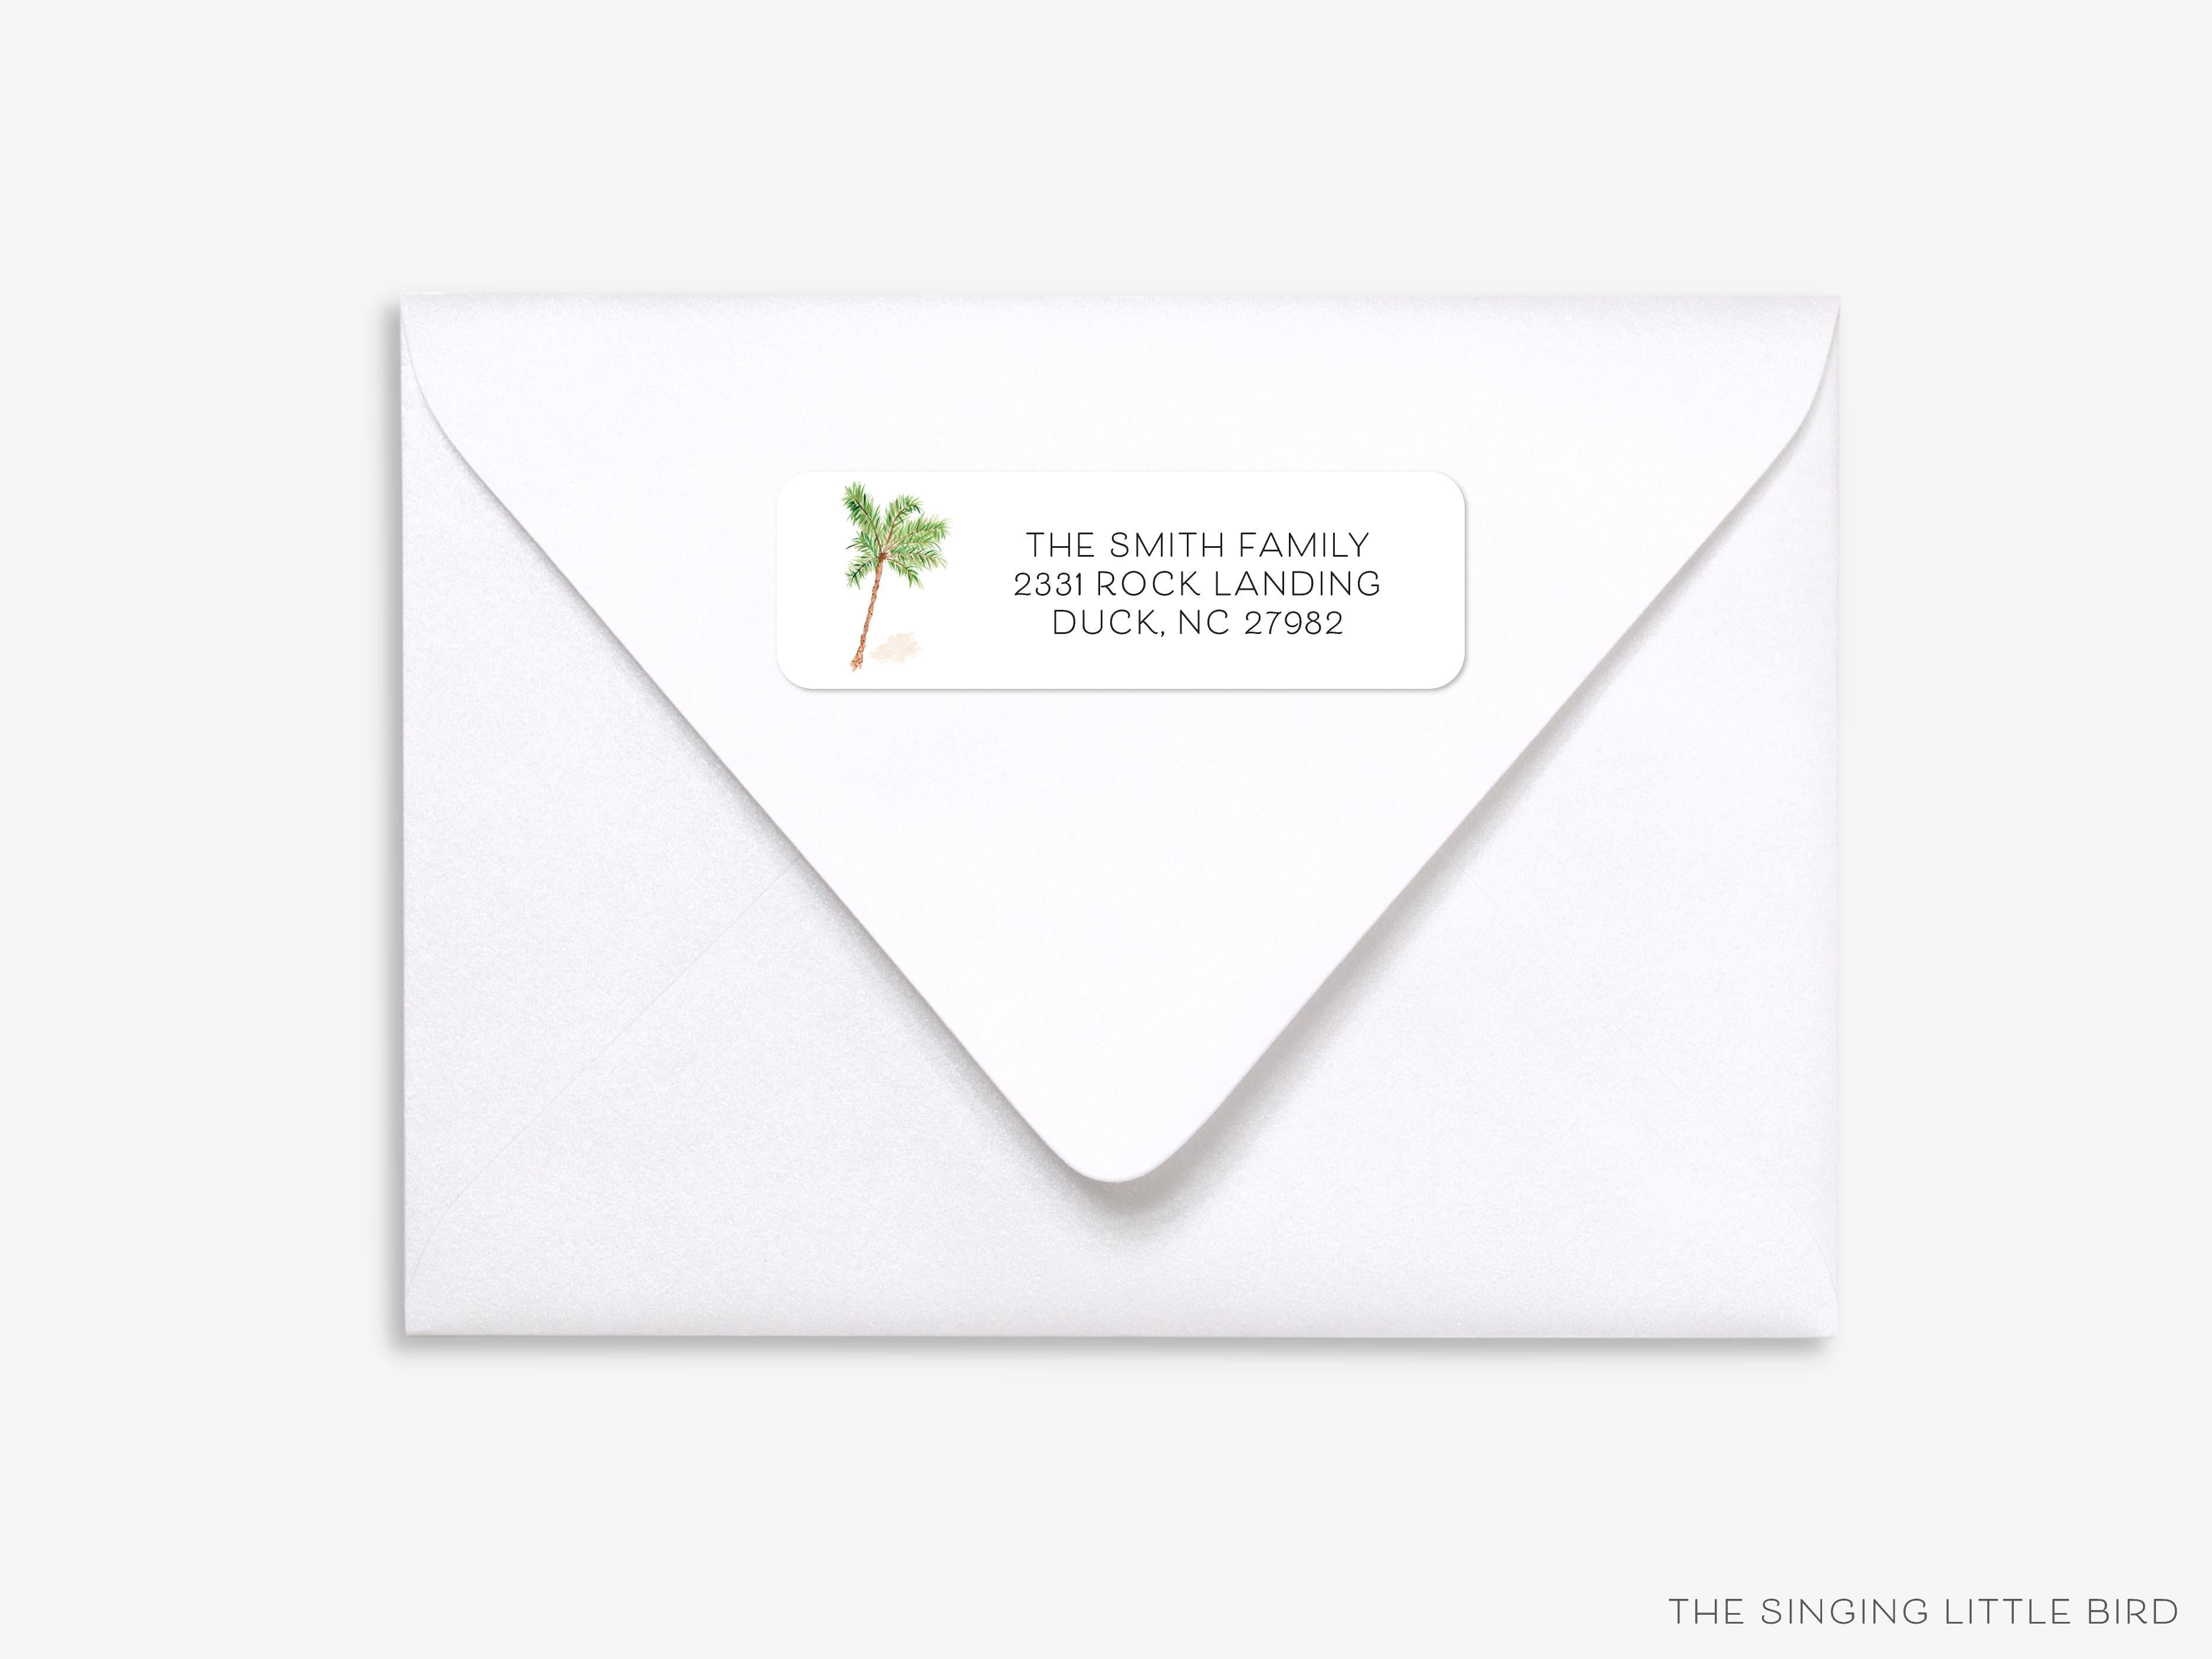 Palm Tree Return Address Labels-These personalized return address labels are 2.625" x 1" and feature our hand-painted watercolor Palm Tree, printed in the USA on beautiful matte finish labels. These make gifts for yourself or the tropical tree lover. -The Singing Little Bird